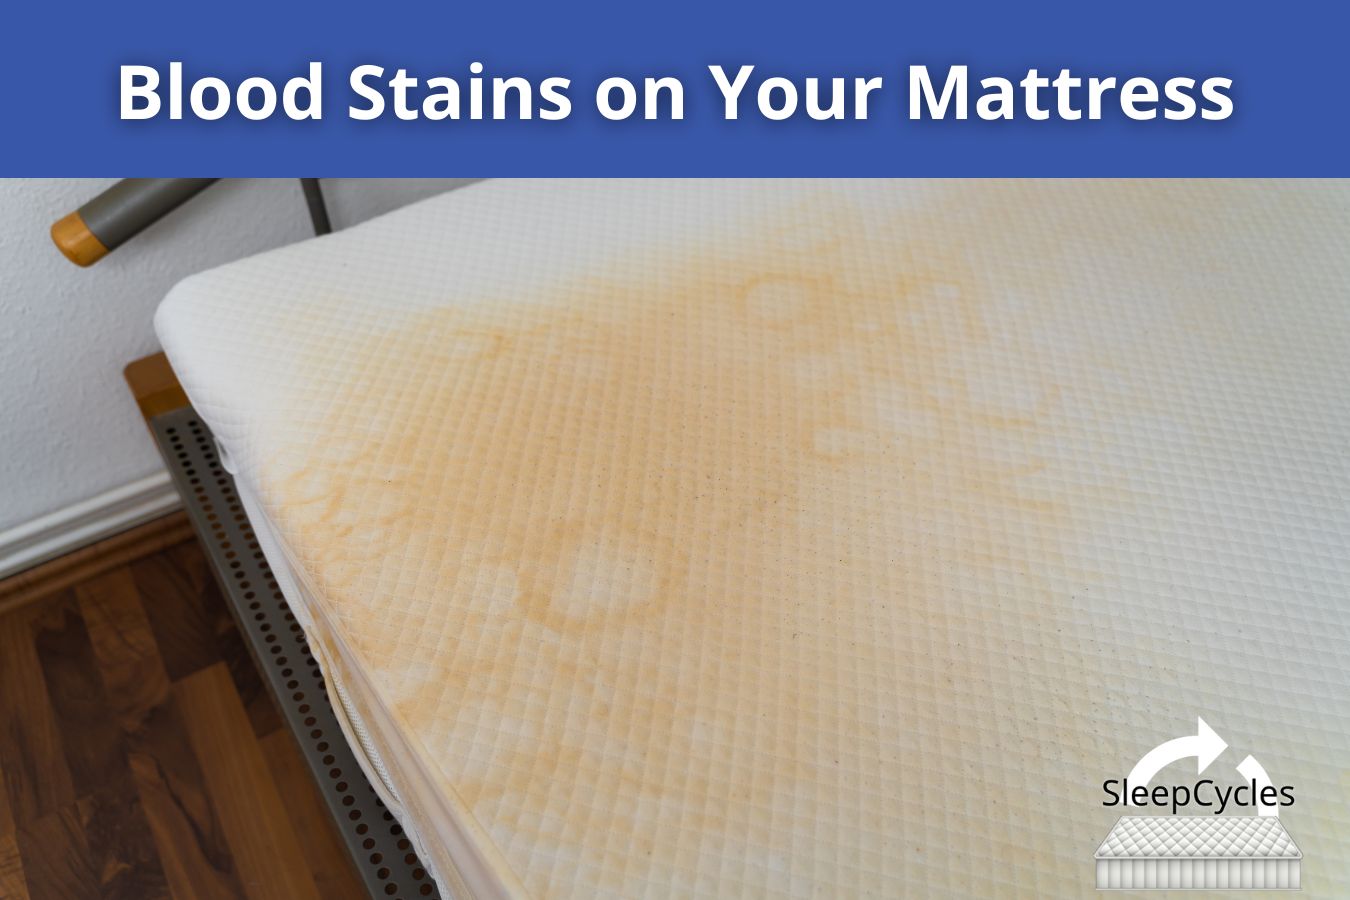 Blood Stains on Your Mattress